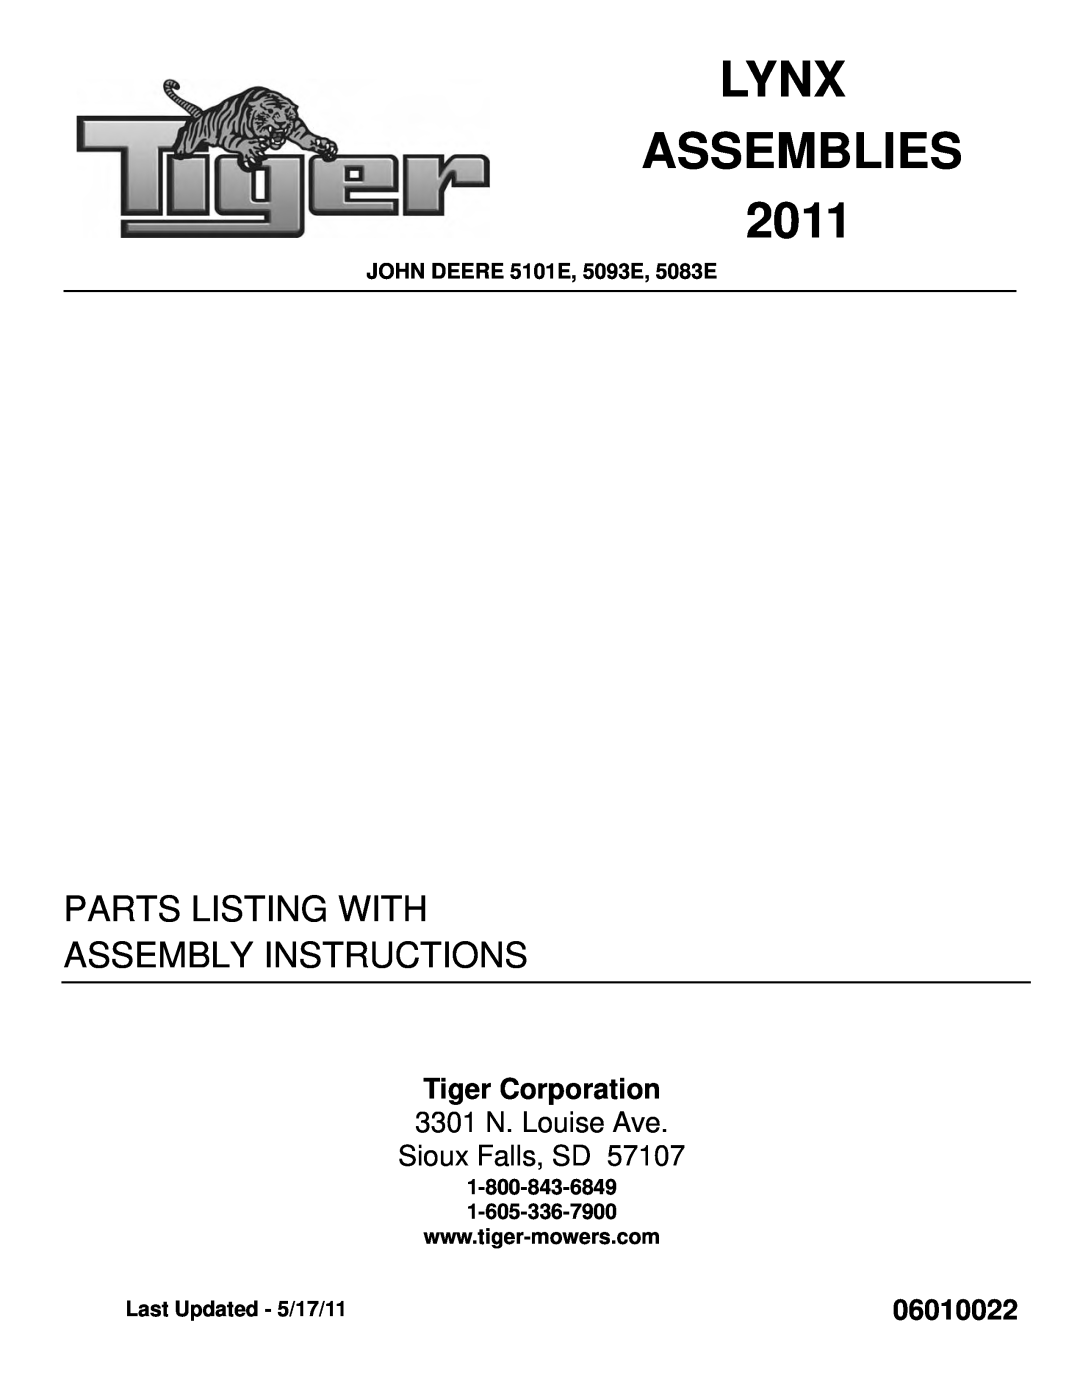 Tiger Products Co., Ltd 5093E manual LYNX ASSEMBLIES 2011, Parts Listing With Assembly Instructions, Tiger Corporation 